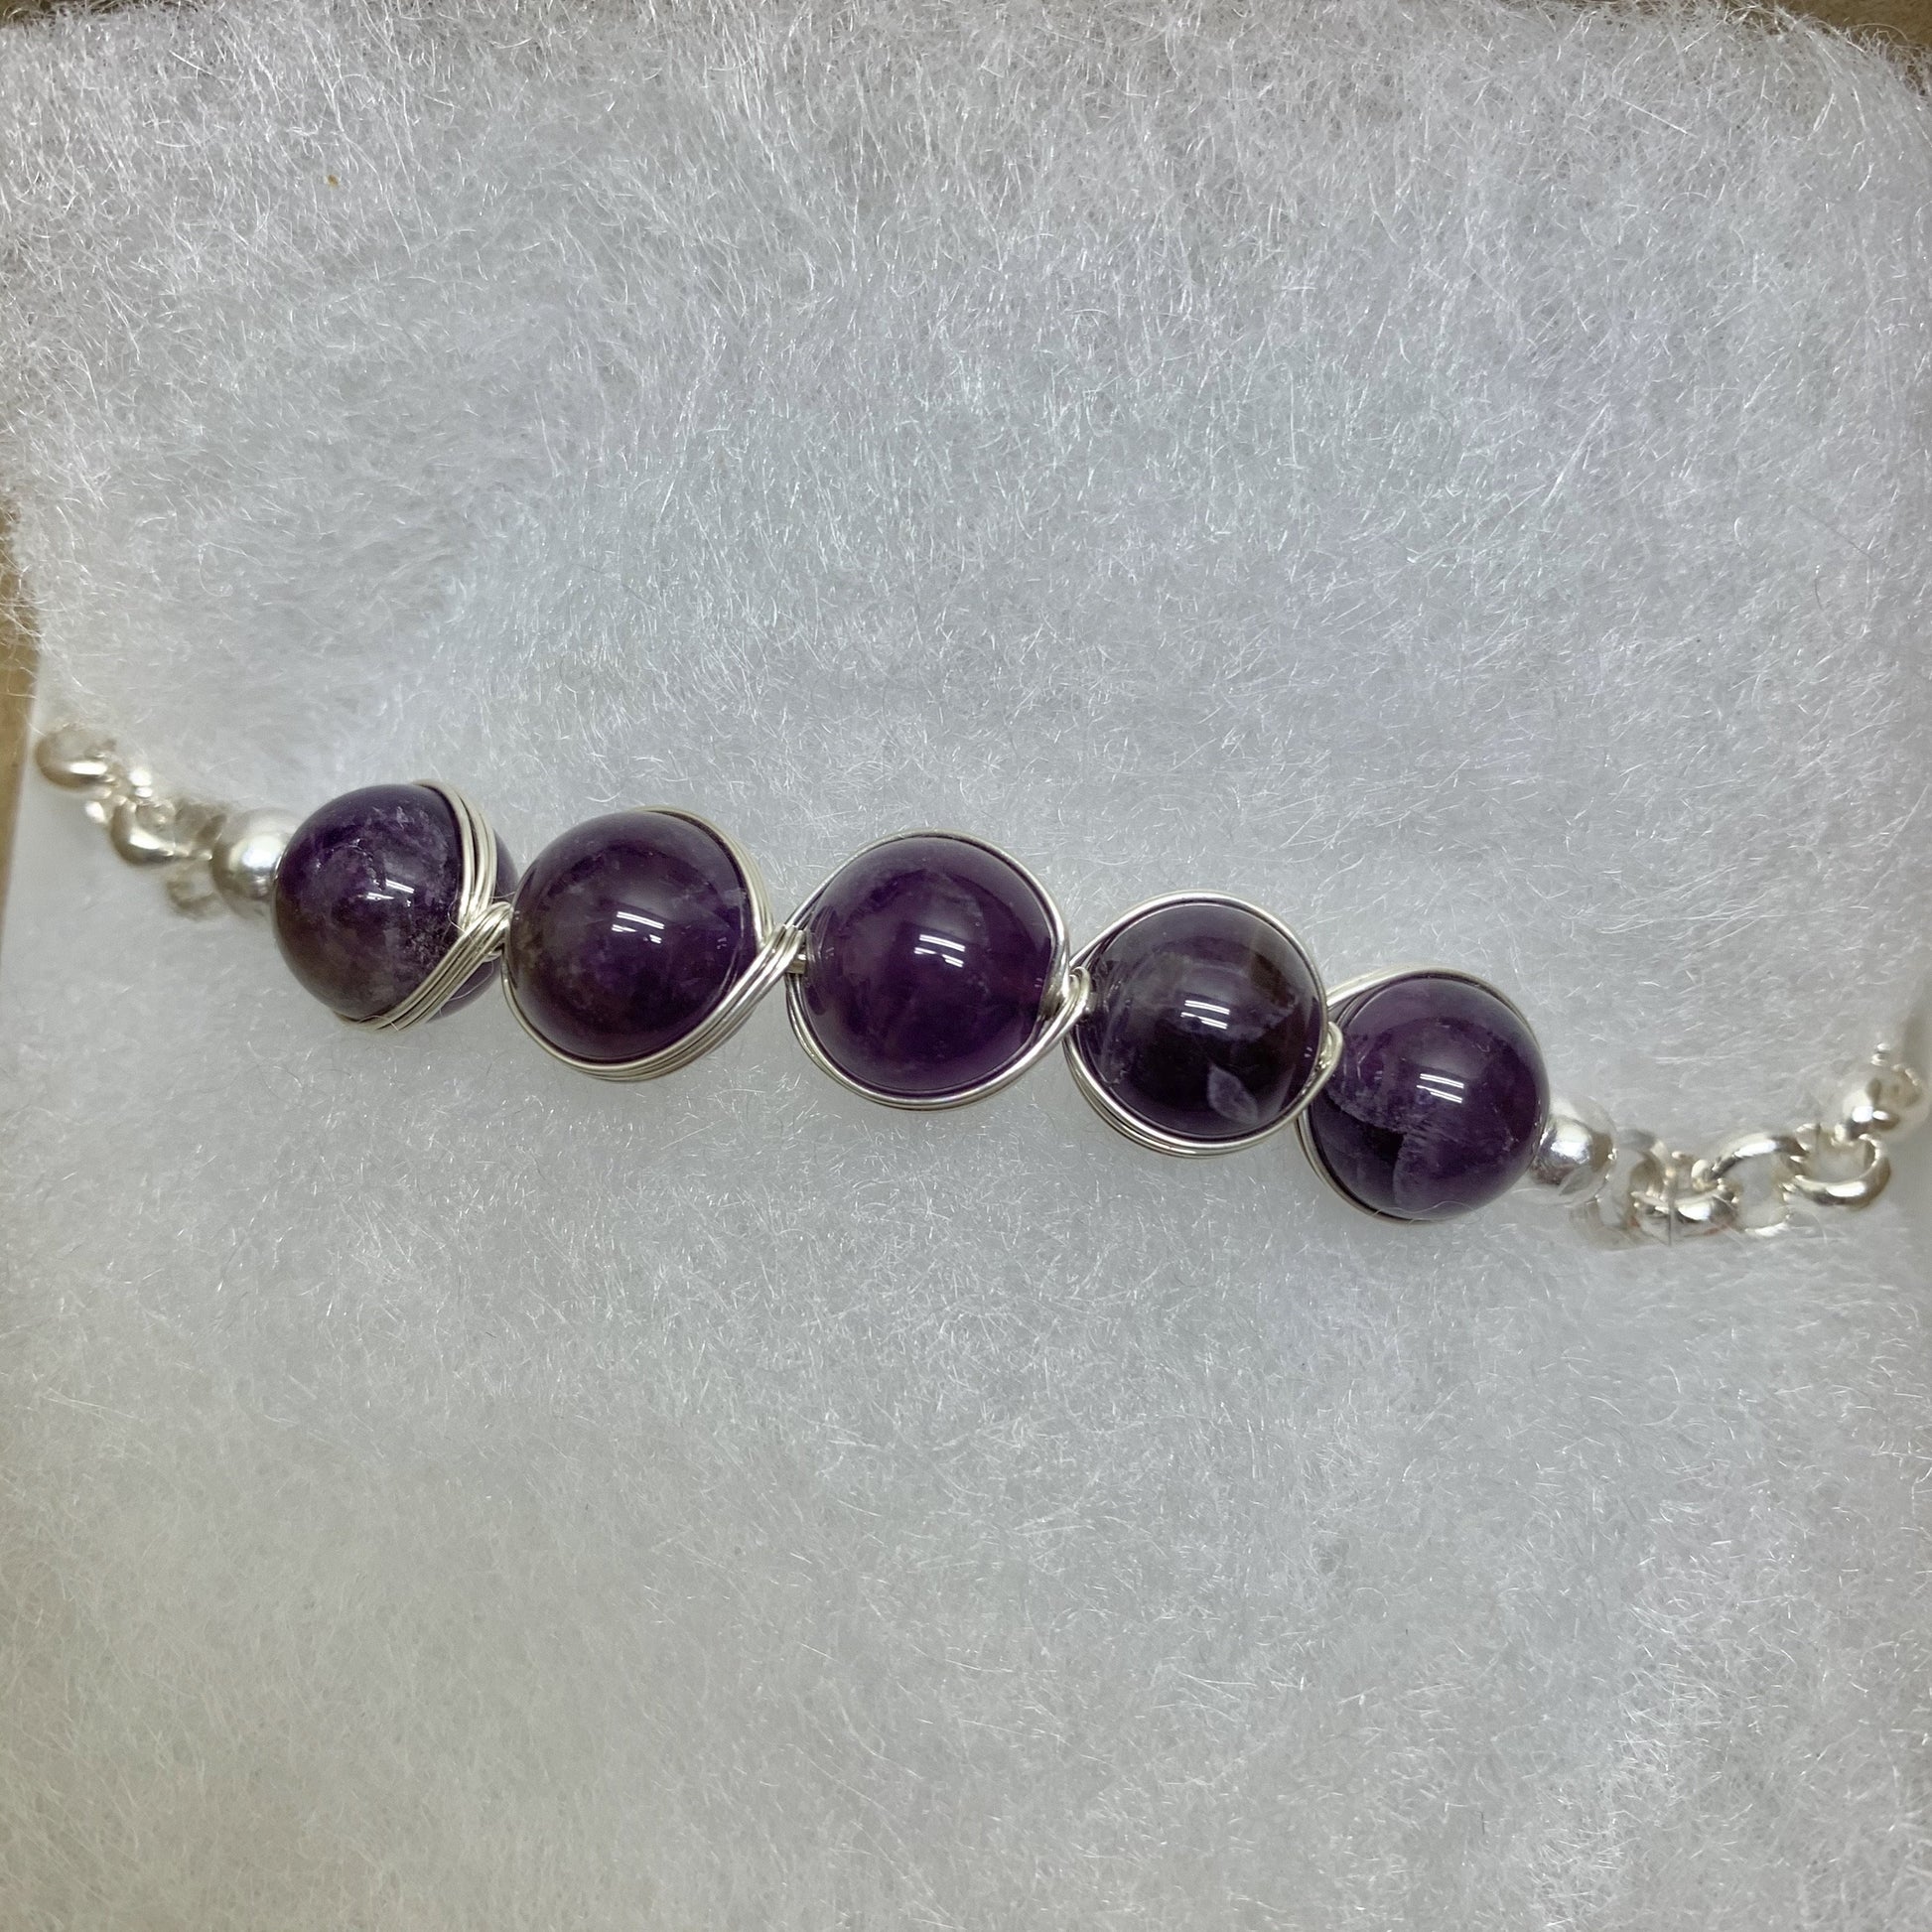 10mm amethyst beads with Egyptian style sterling silver wire wrapped with silver plated on stainless steel tool chain and magnetic clasp